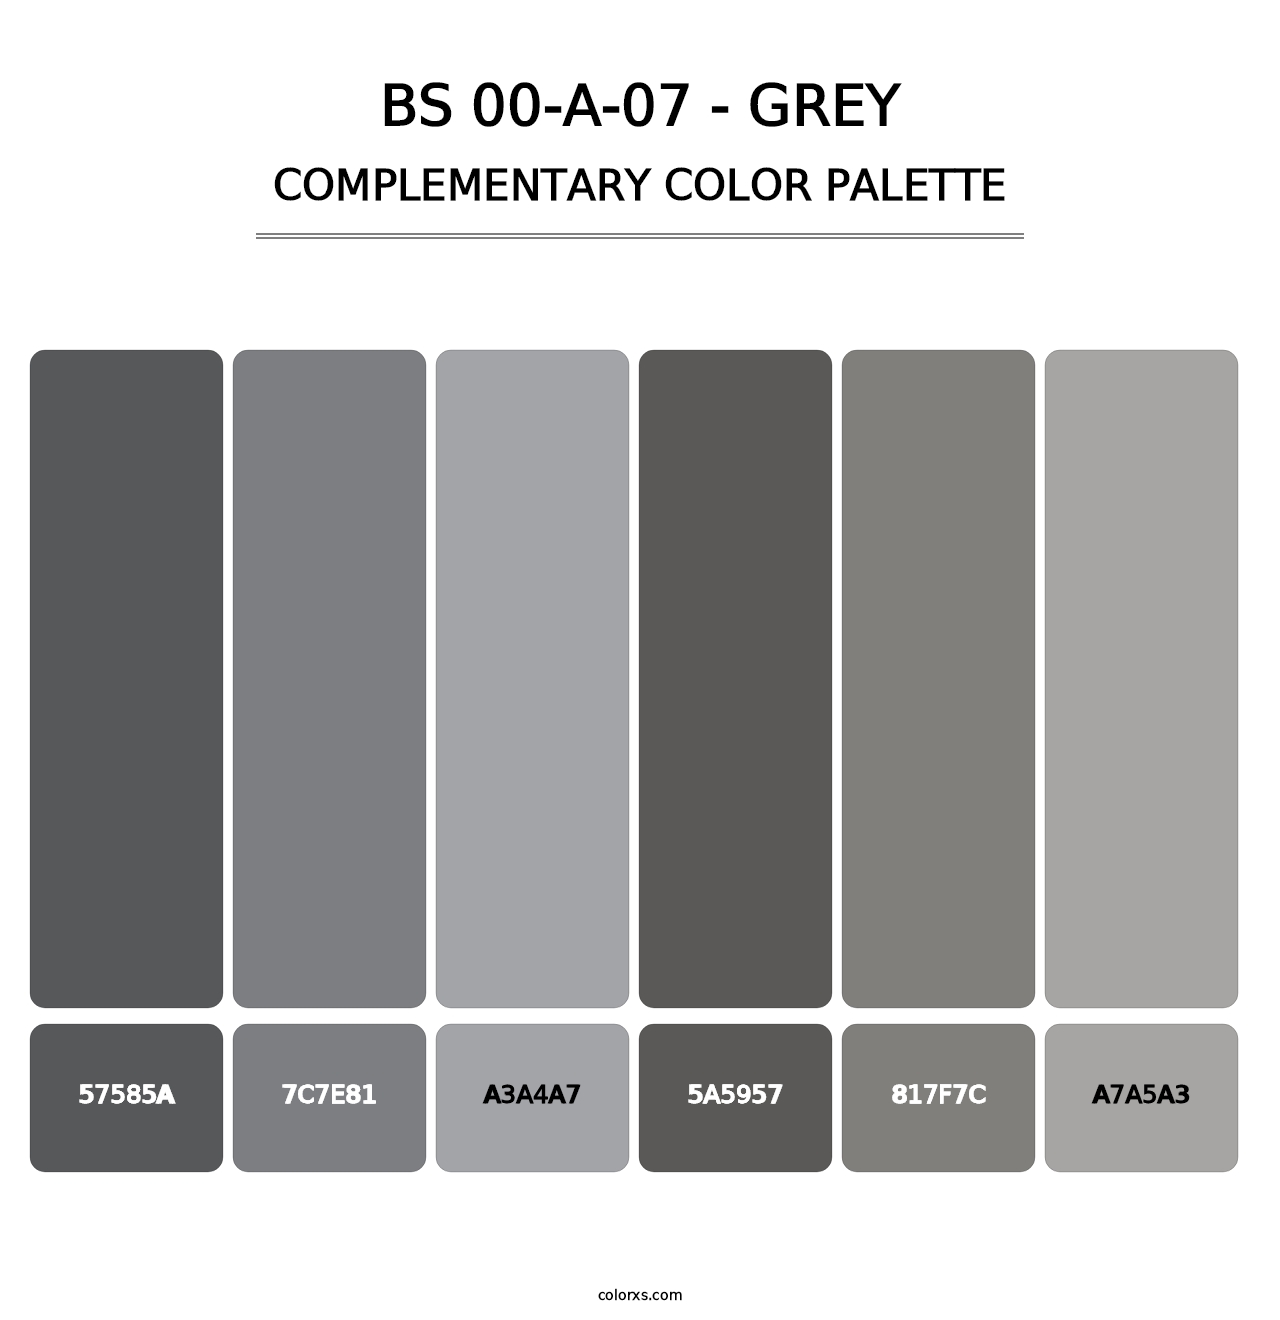 BS 00-A-07 - Grey - Complementary Color Palette